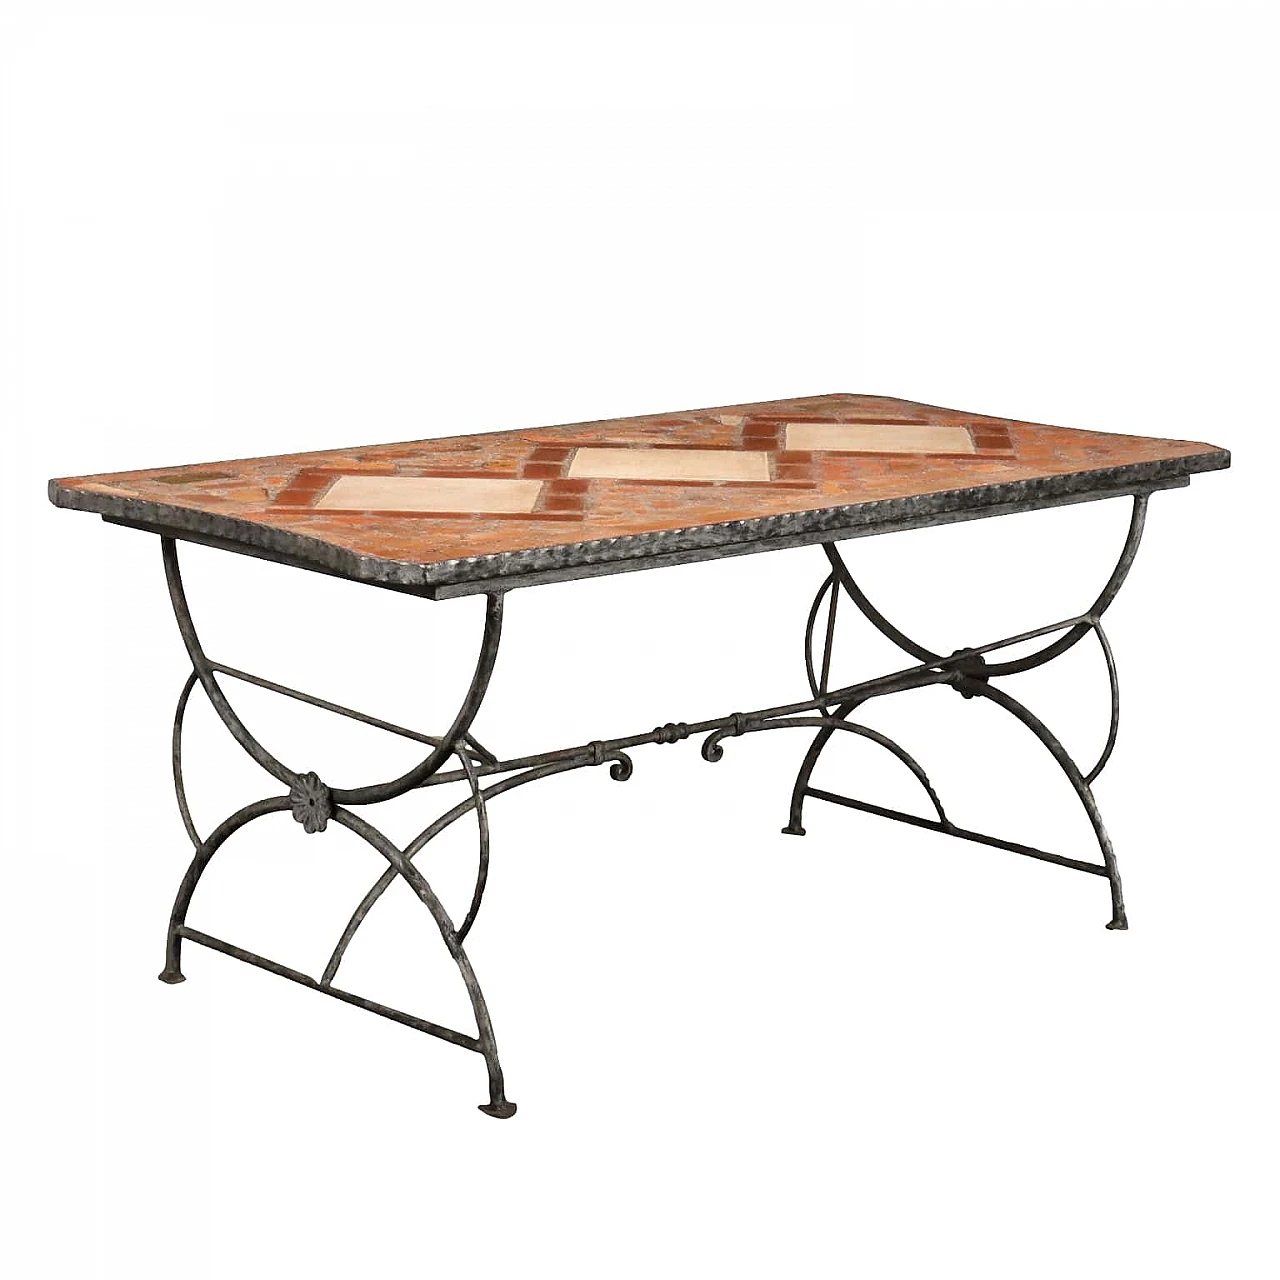 Iron garden table with terracotta and ceramic top 1